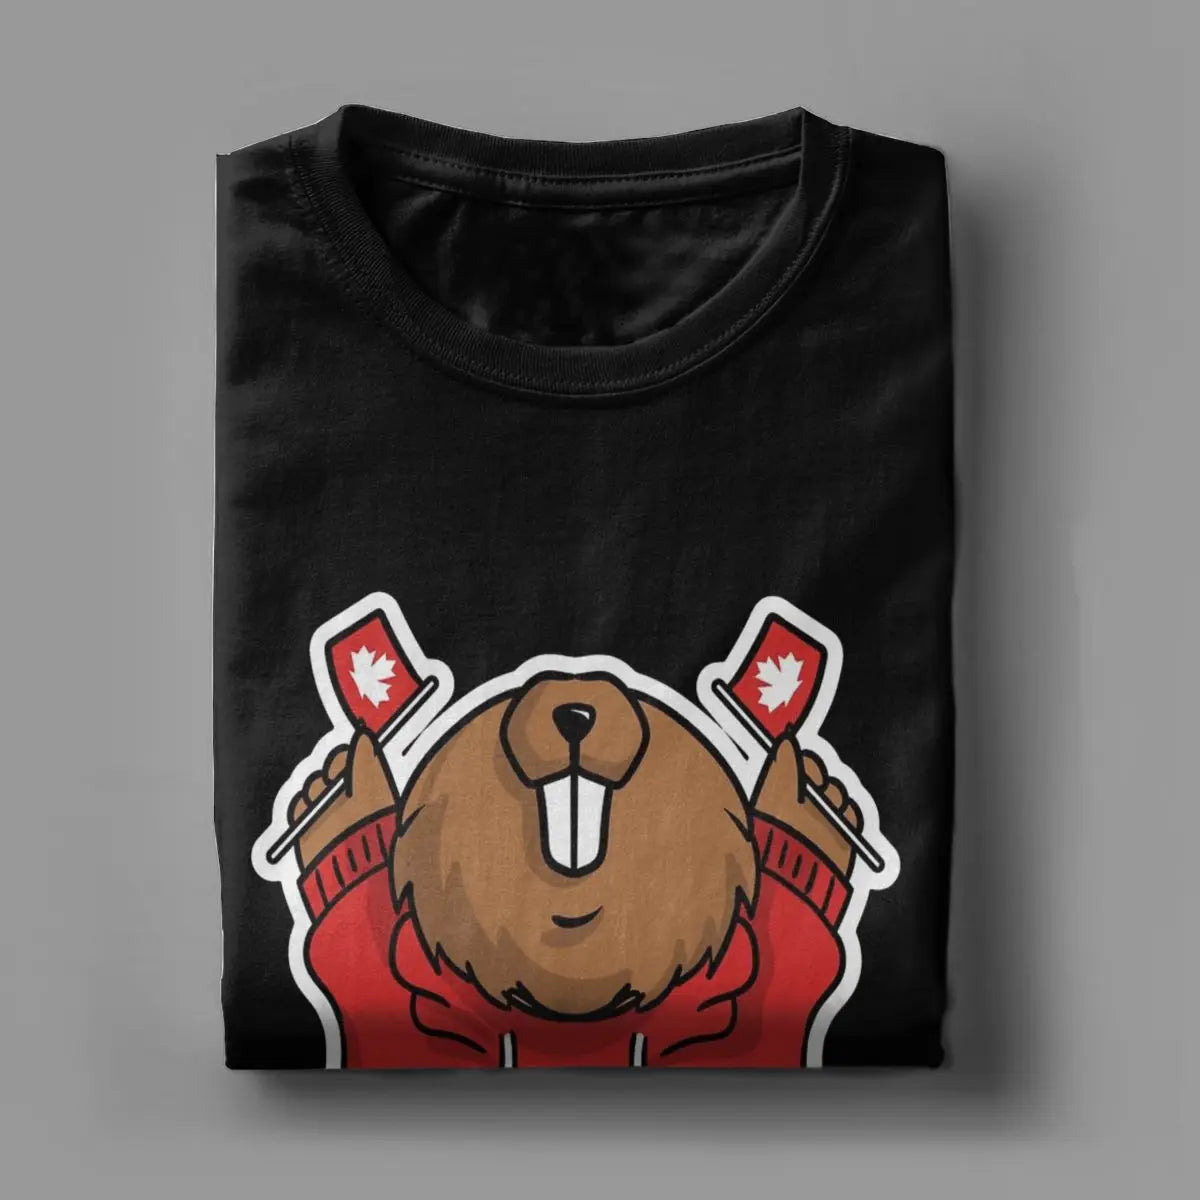 Proud Canadian Beaver T-Shirt: Celebrate Canada Day in Style